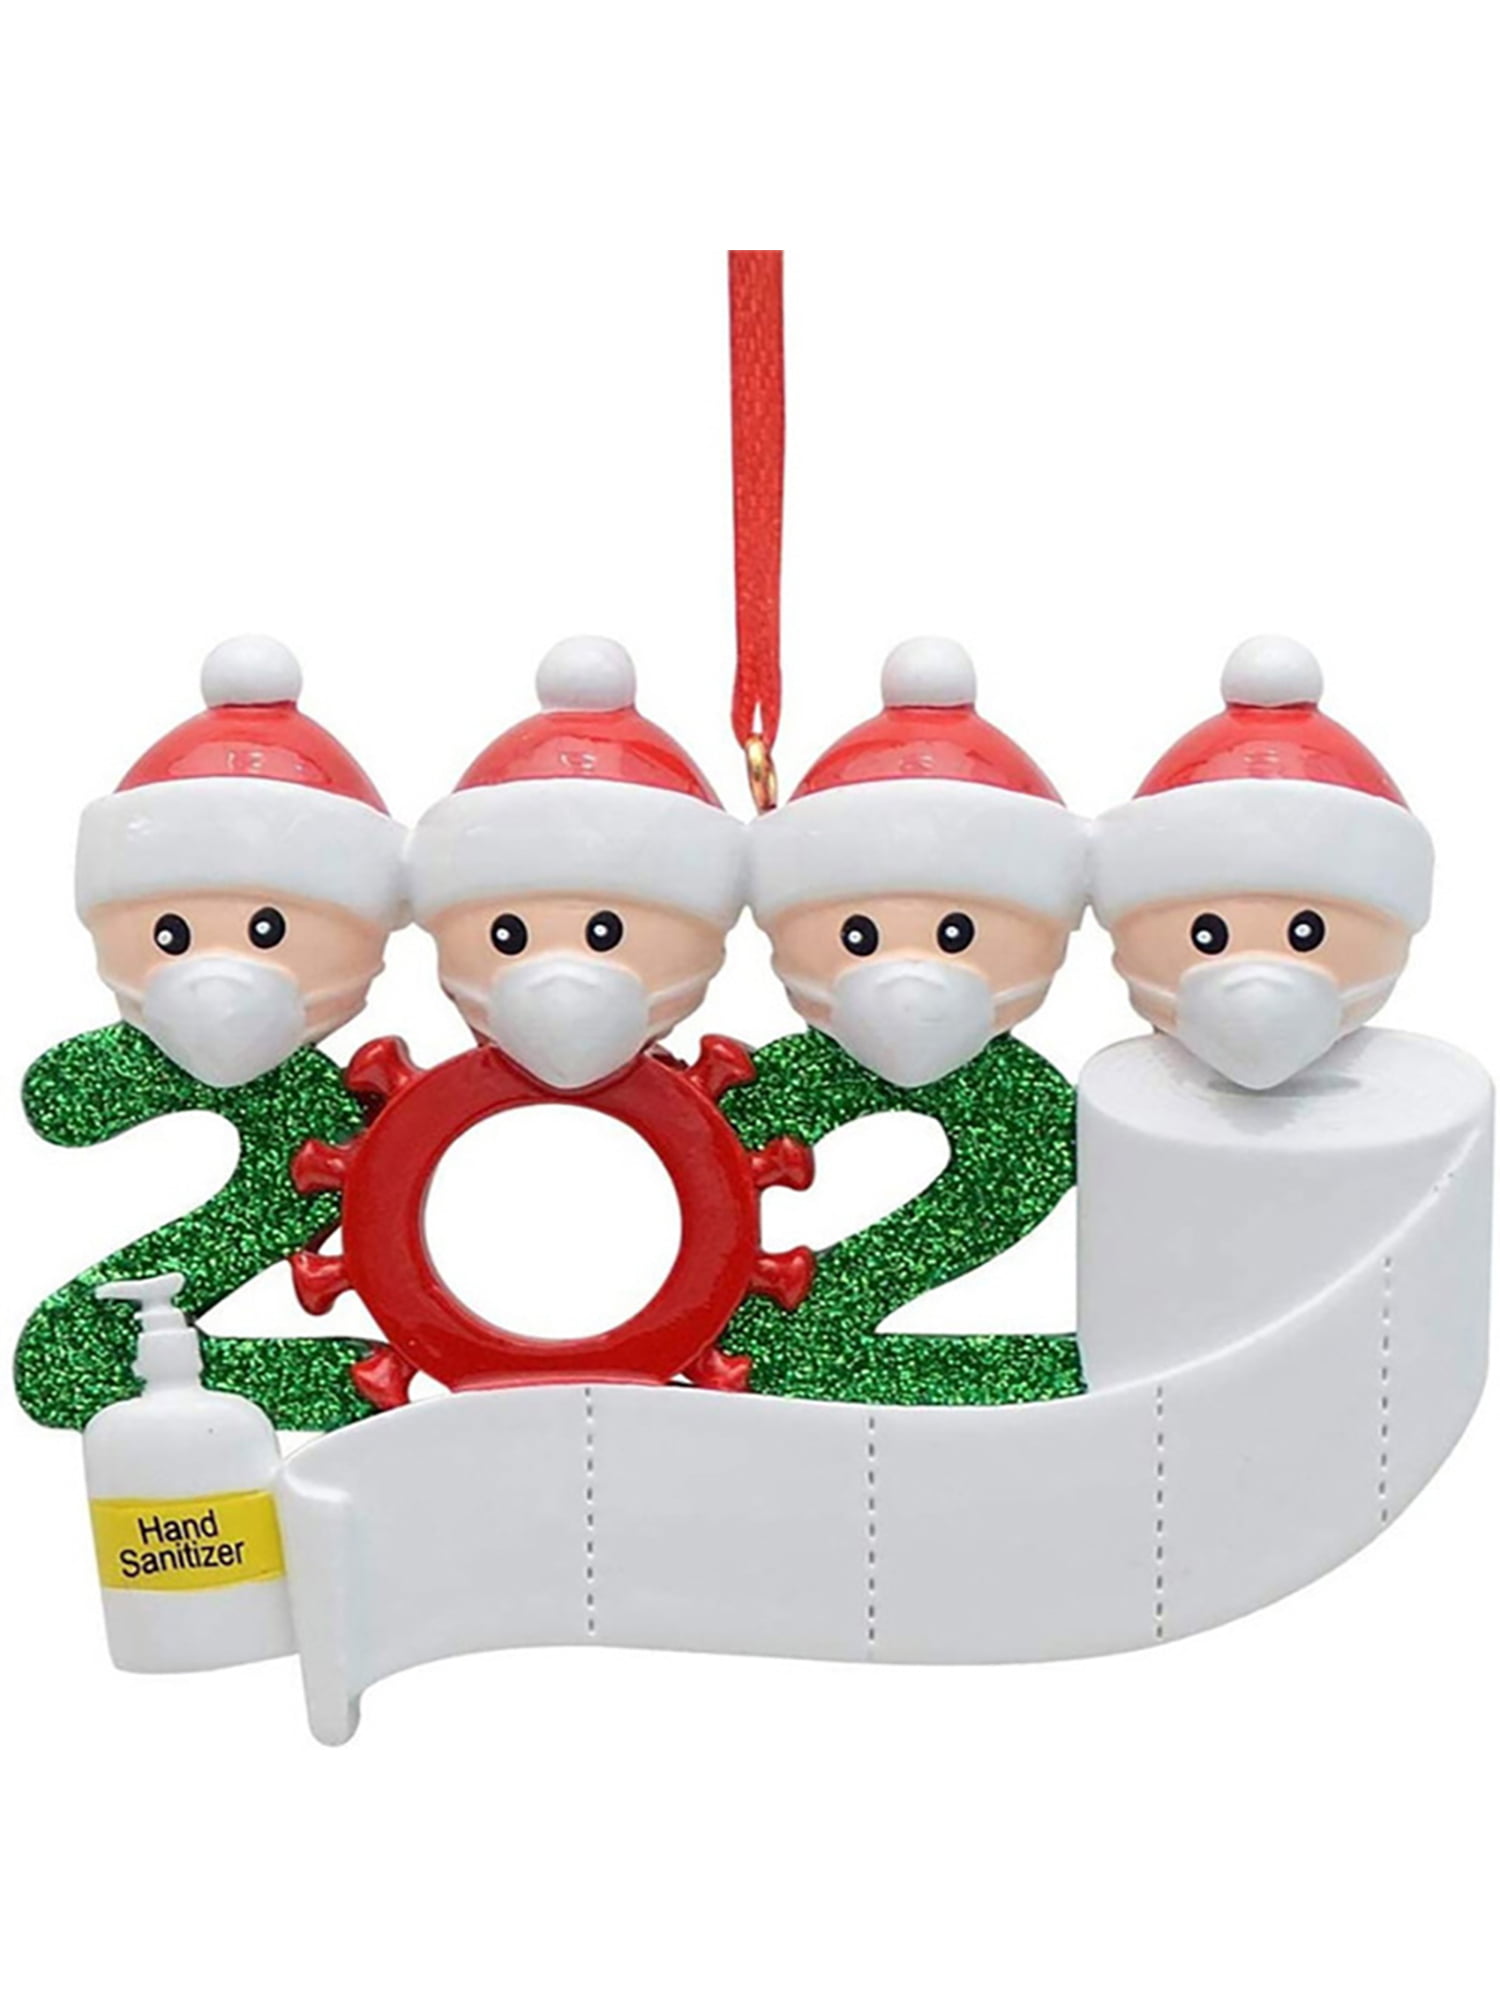 2020 Merry Christmas Hanging Ornament Family Personalized Xmas Decor New 